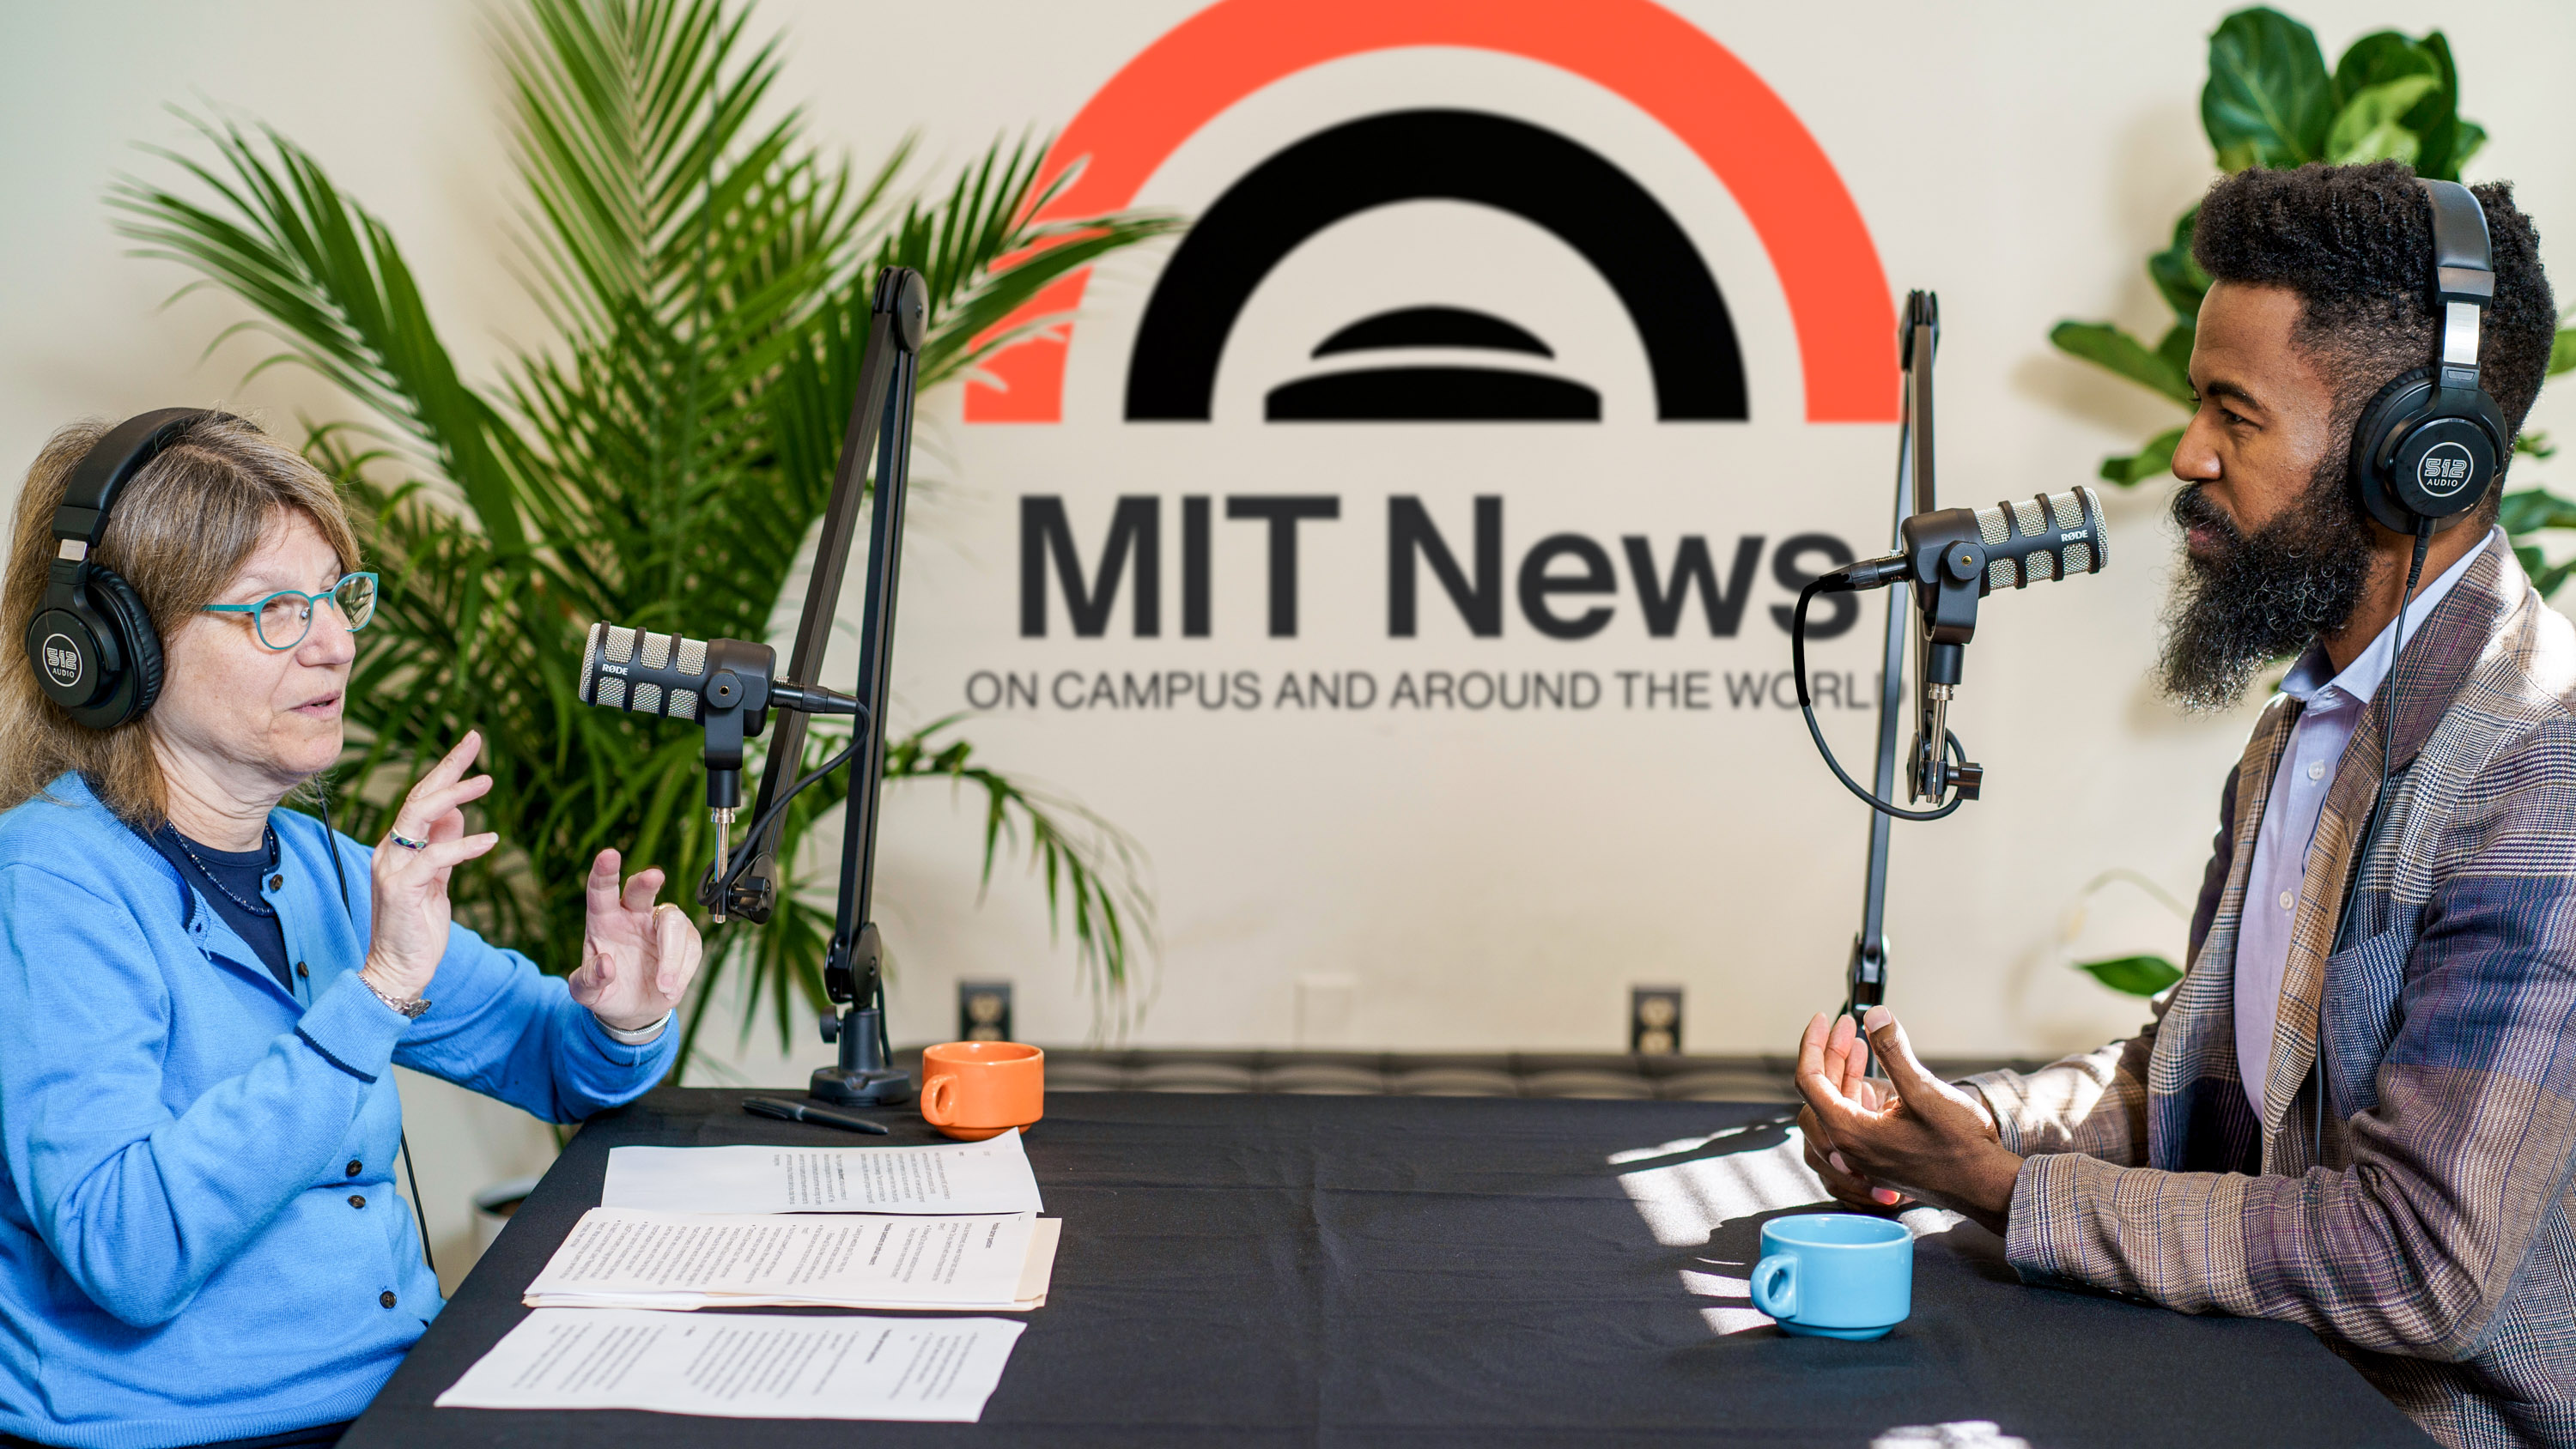 MIT President Dr. Sally Kornbluth interviewing Dr. Joshua Bennett with the MIT News logo seen between them on the wall